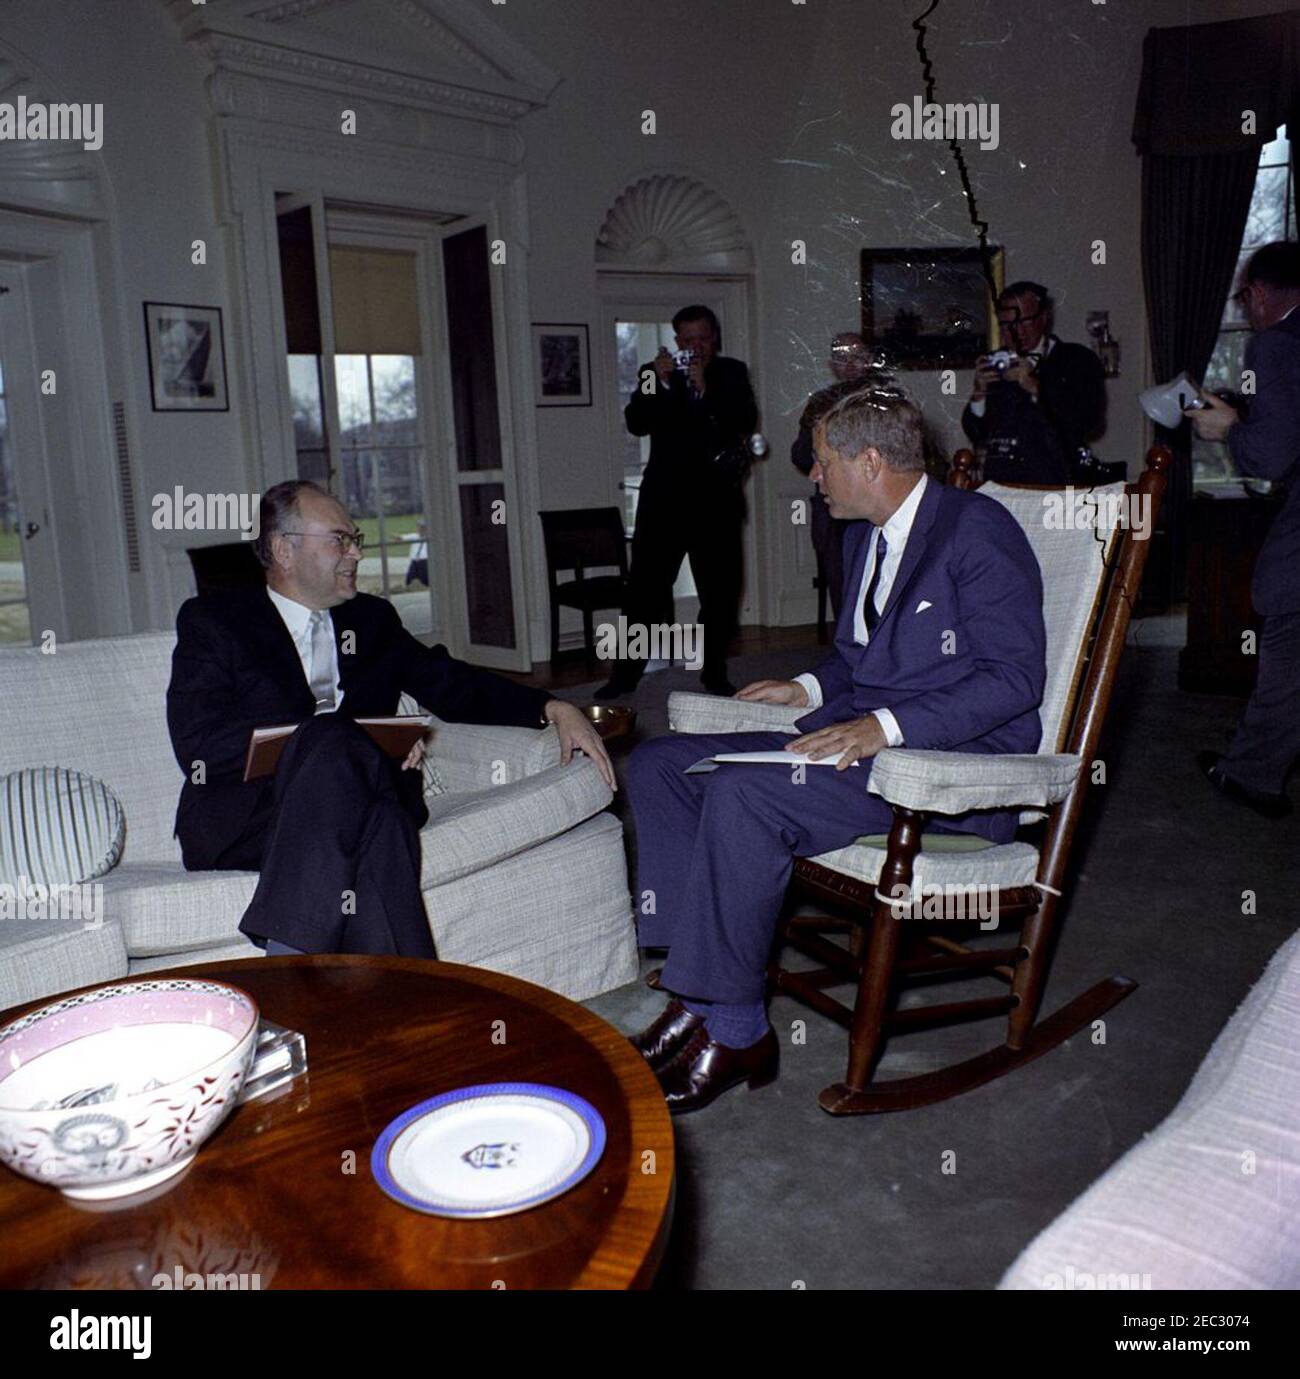 Meeting with the Ambassador of the Soviet Union (USSR), Anatoliy Fedorovich Dobrynin, 12:27PM. President John F. Kennedy (in rocking chair) meets with Ambassador of the Soviet Union (USSR), Anatoliy Fedorovich Dobrynin (left), in the Oval Office of the White House, Washington, D.C. Unidentified photographers stand in background. [Scratches and tear in upper right portion of image are original to the negative.] Stock Photo